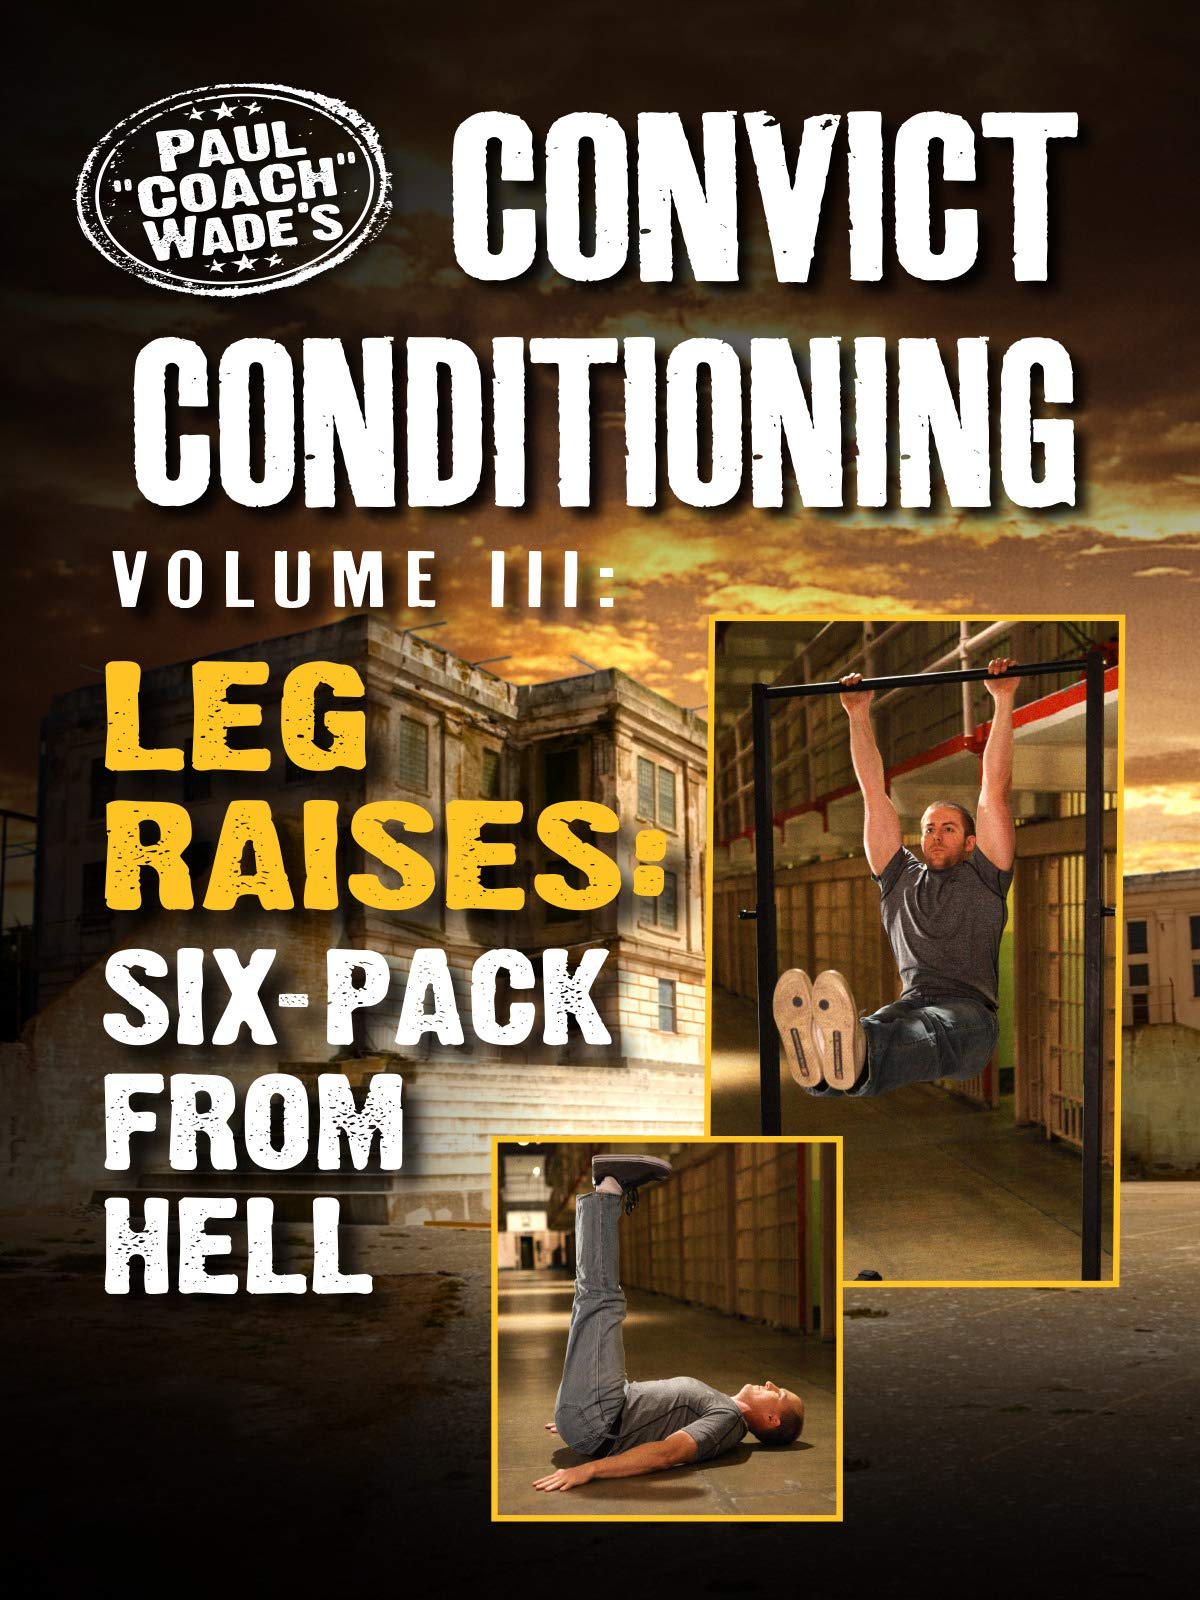 Convict Conditioning - Vol 3 Leg Raises Six Pack from Hell